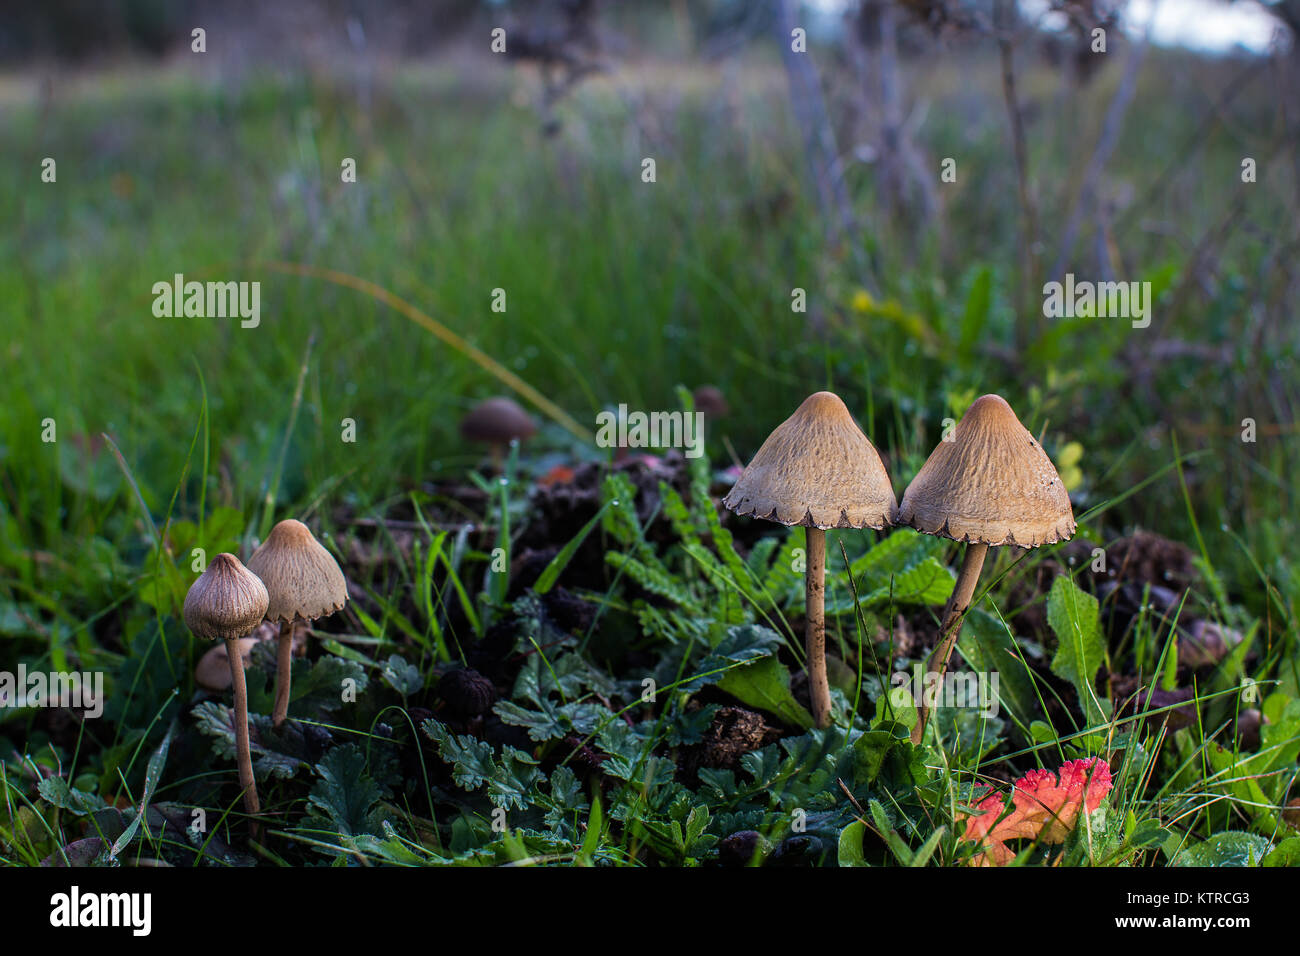 Colony of mushrooms in a meadow. Stock Photo